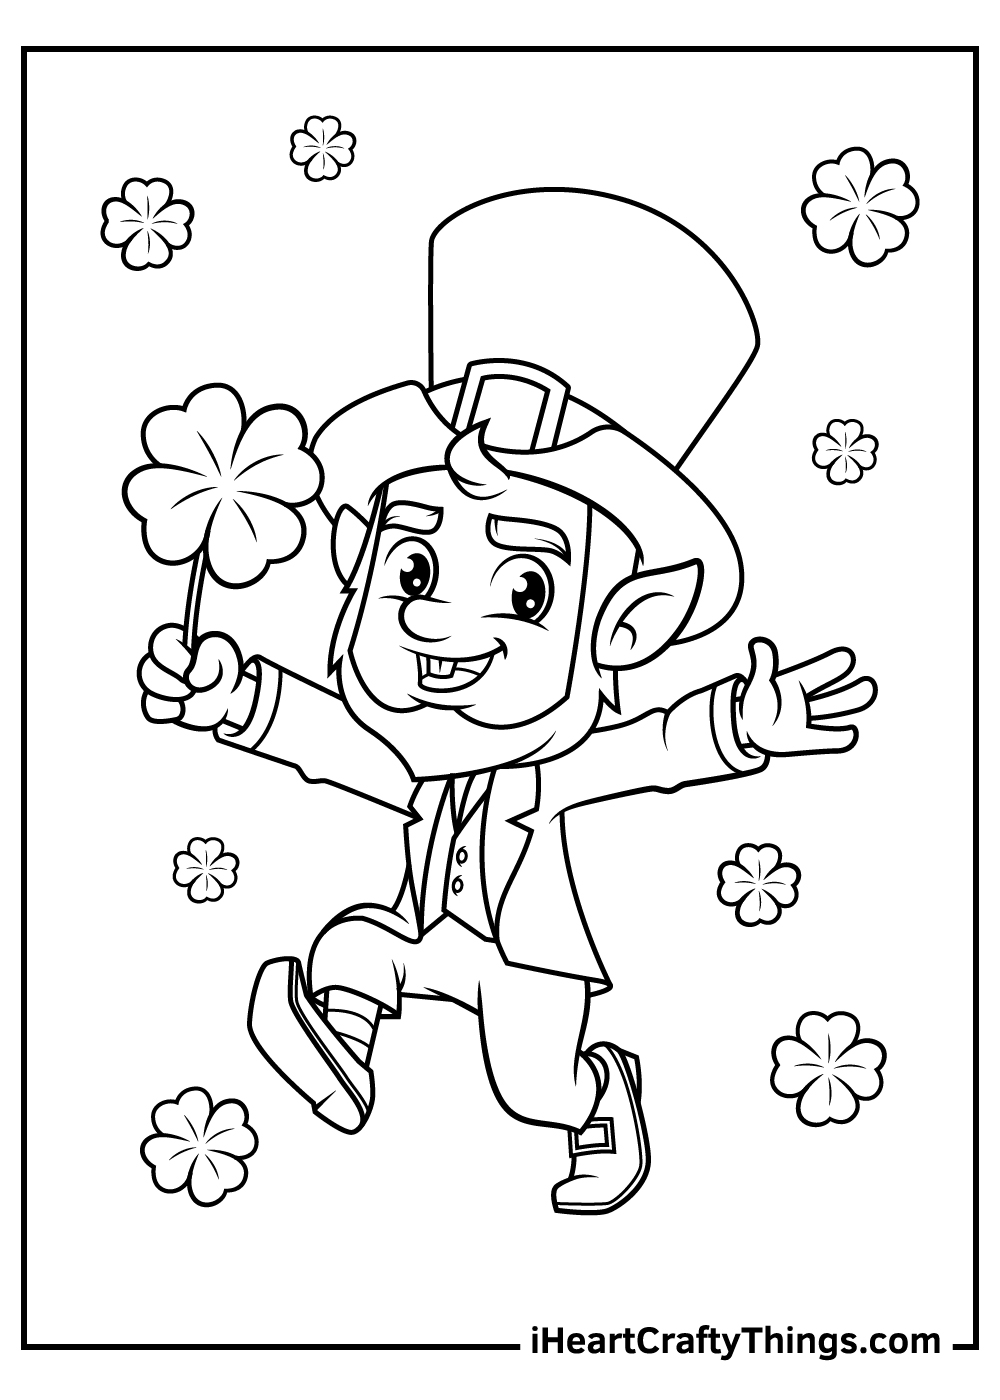 Leprechaun Coloring Pages Updated 20